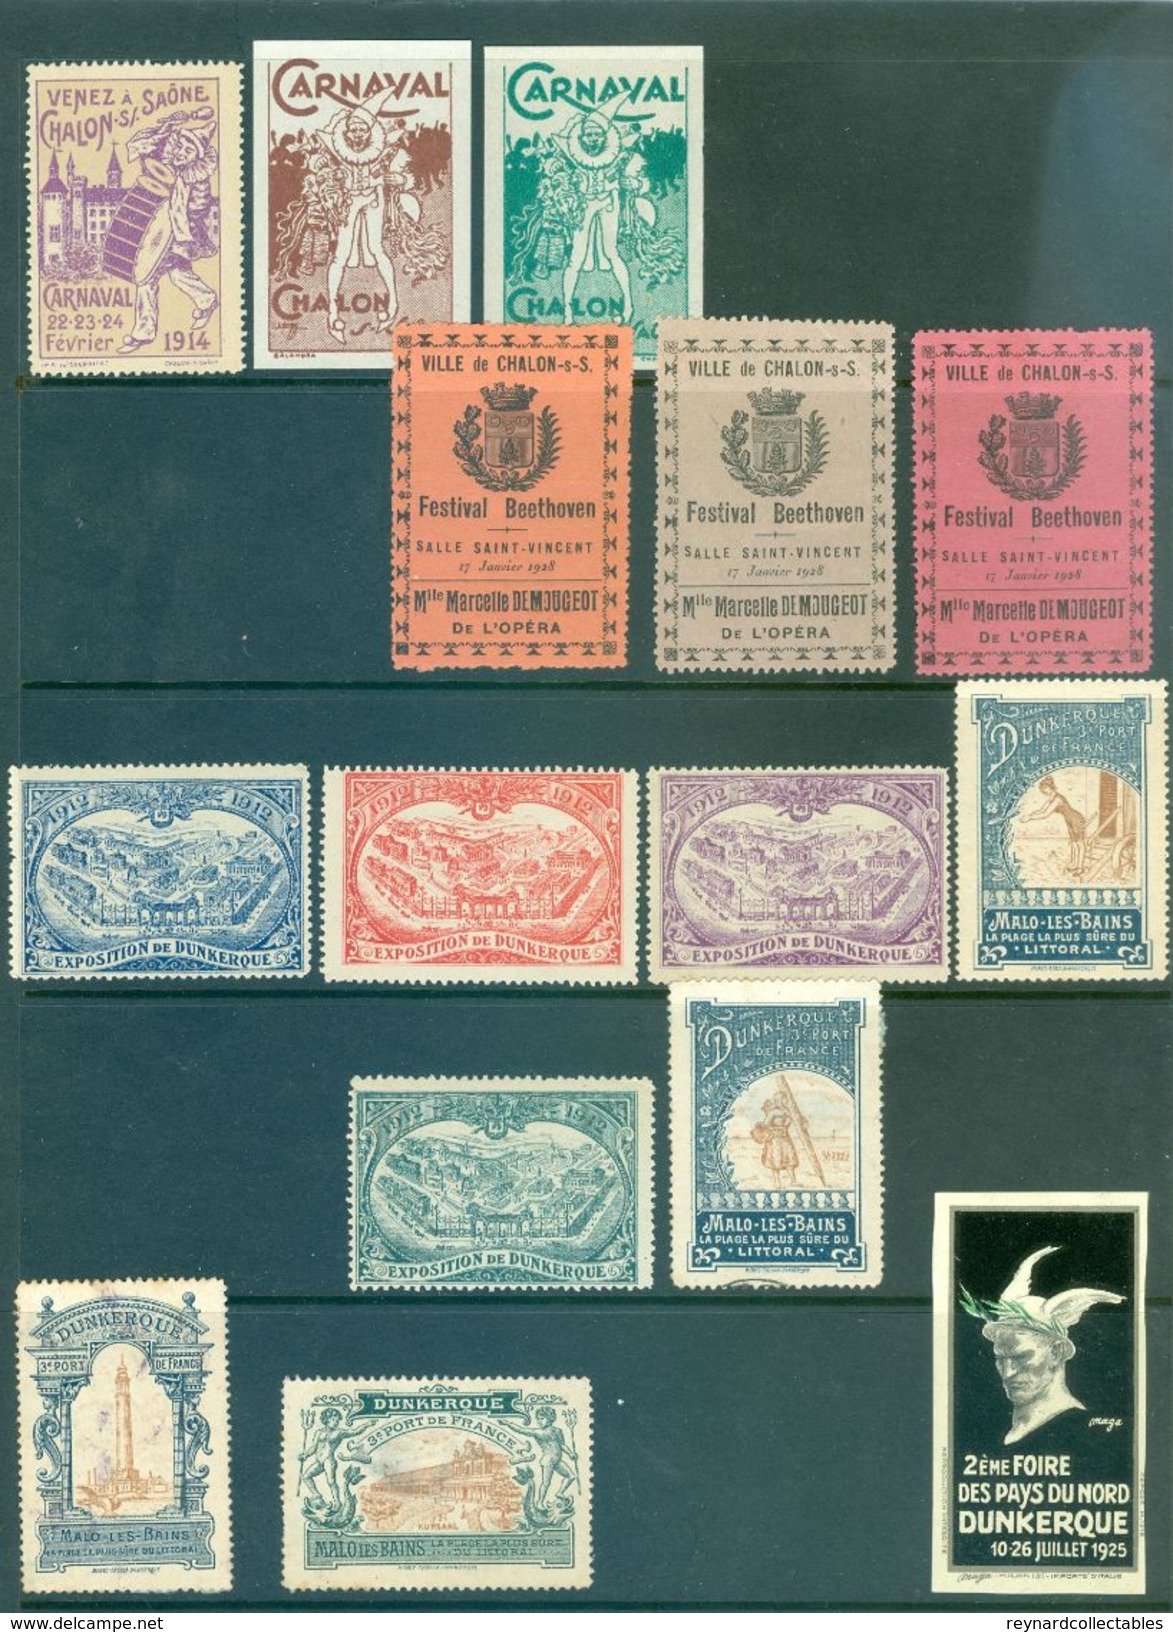 France 490+ vintage cinderella/poster stamps. Expos/Foire, military, Anti TB. Superb lot